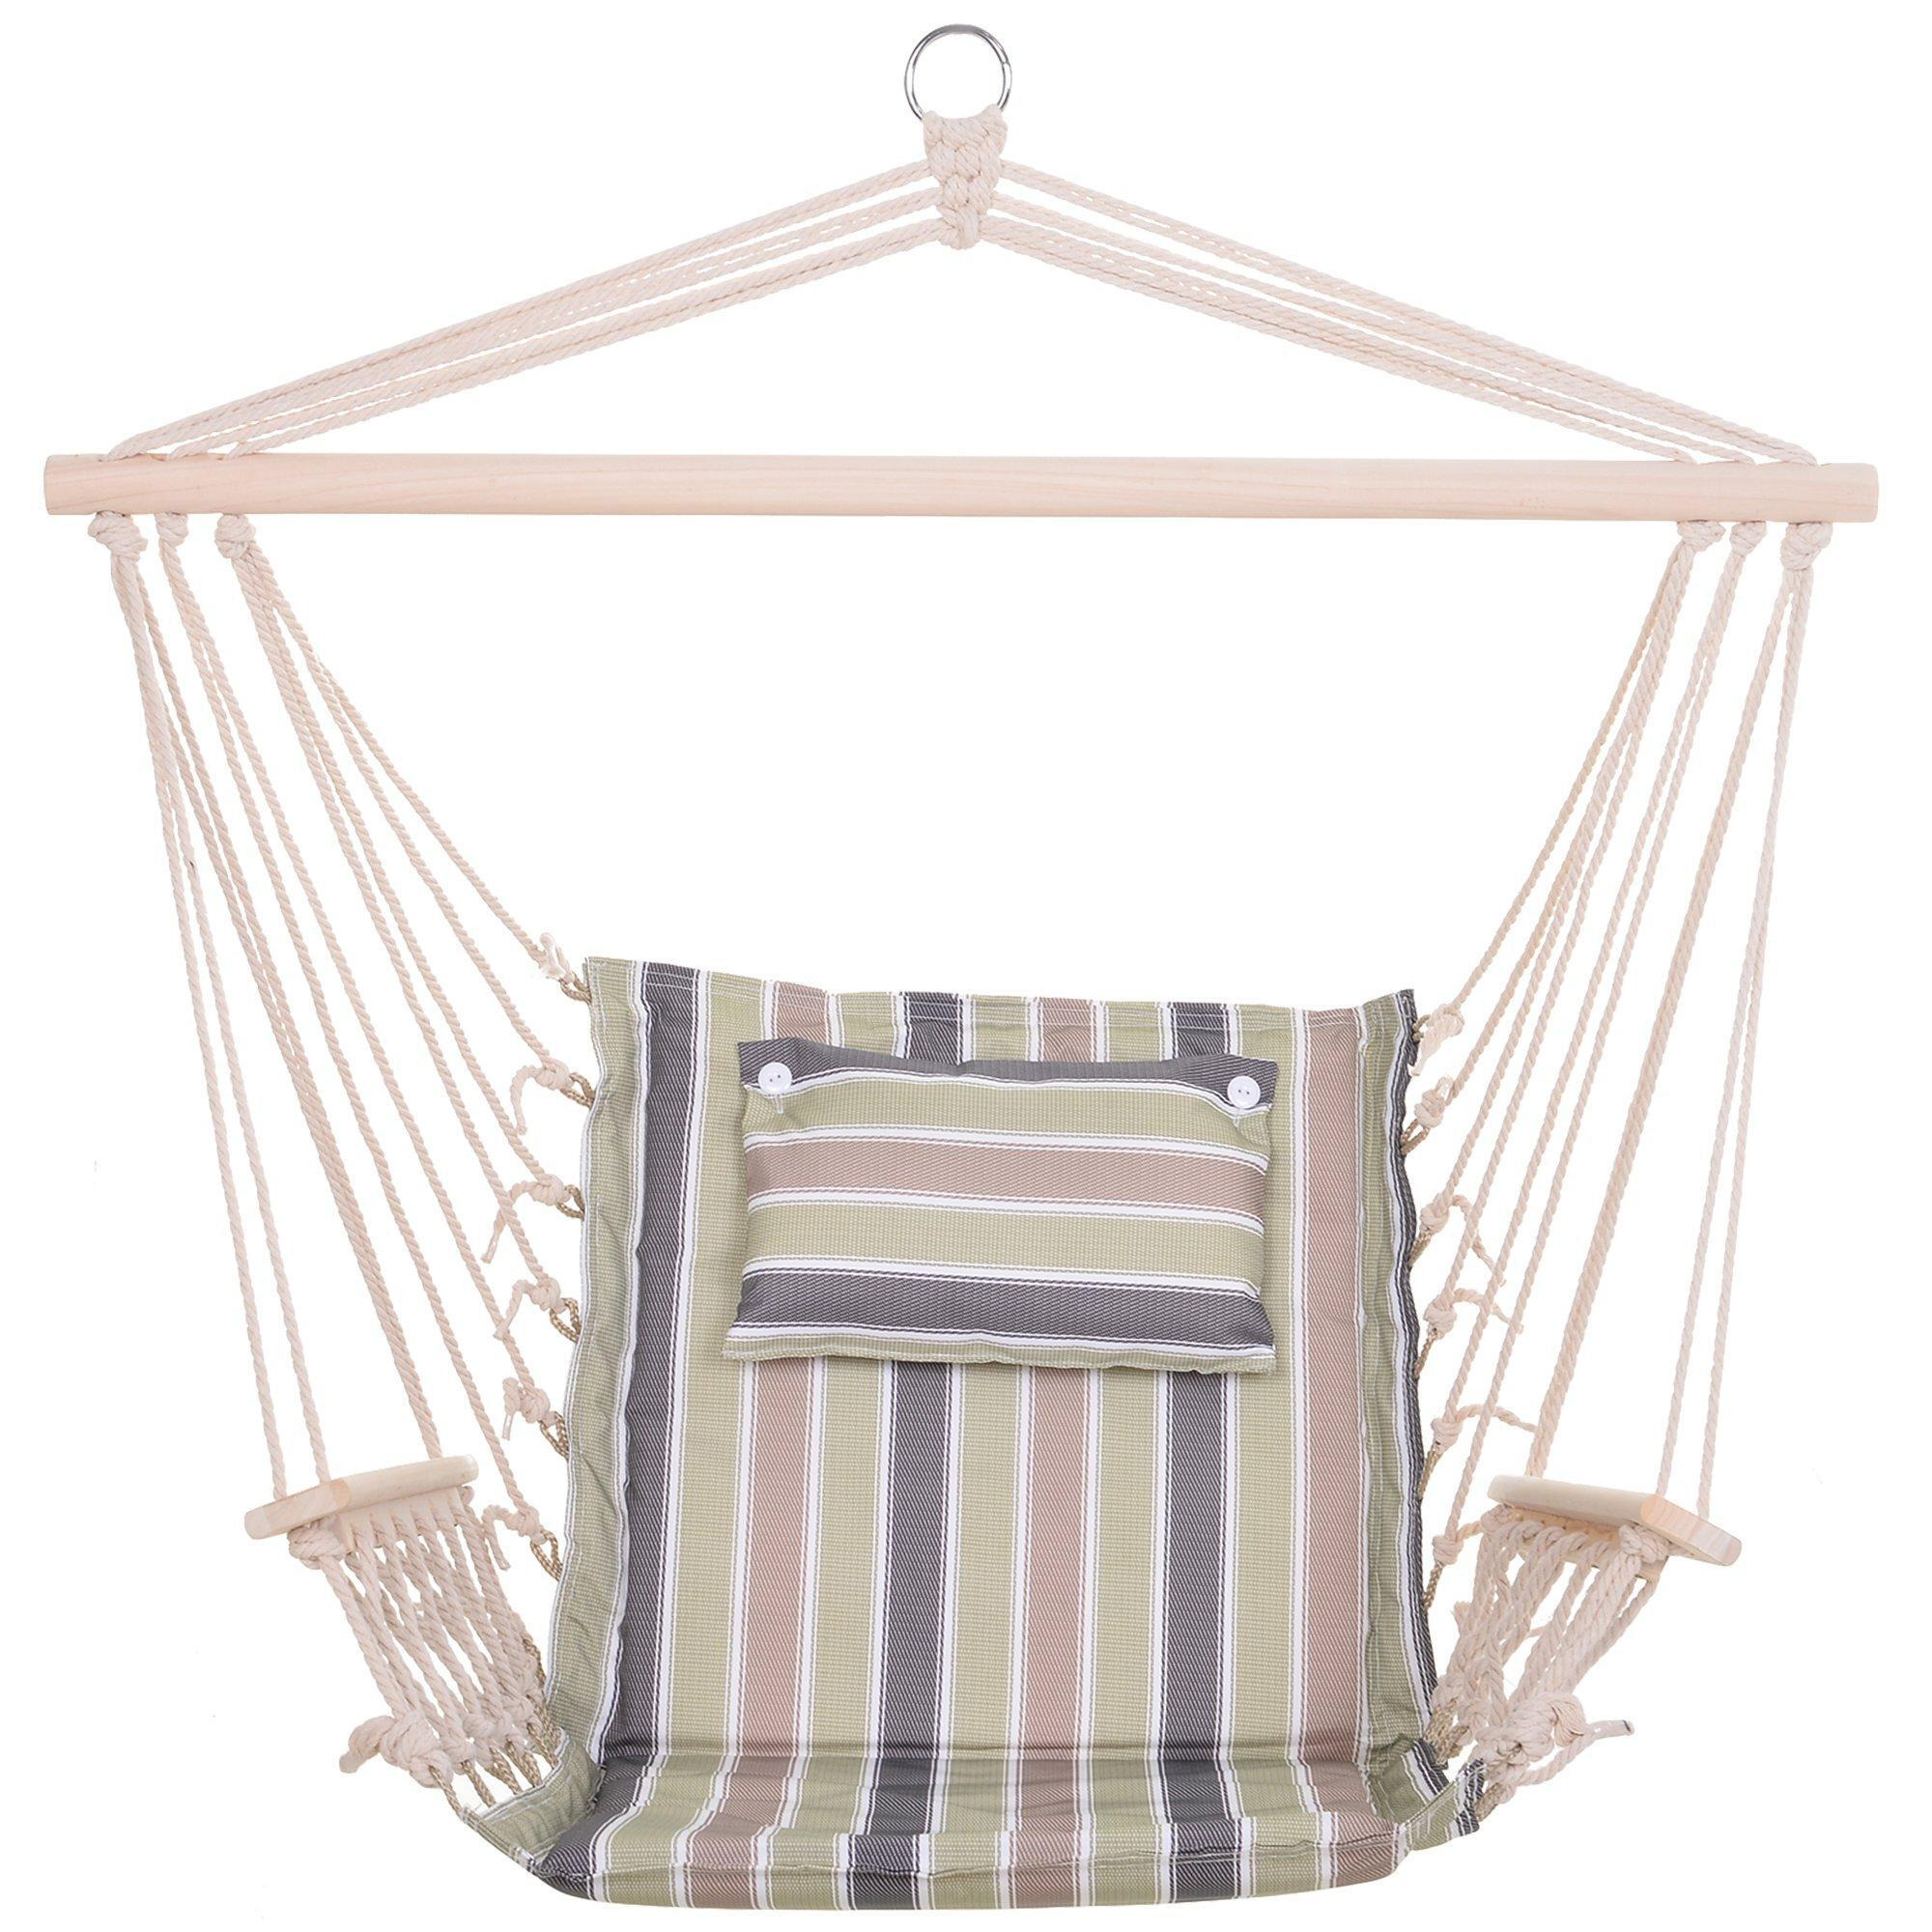 Hammock Hanging Rope Chair Swing with Cushion 120KG Max - image 1